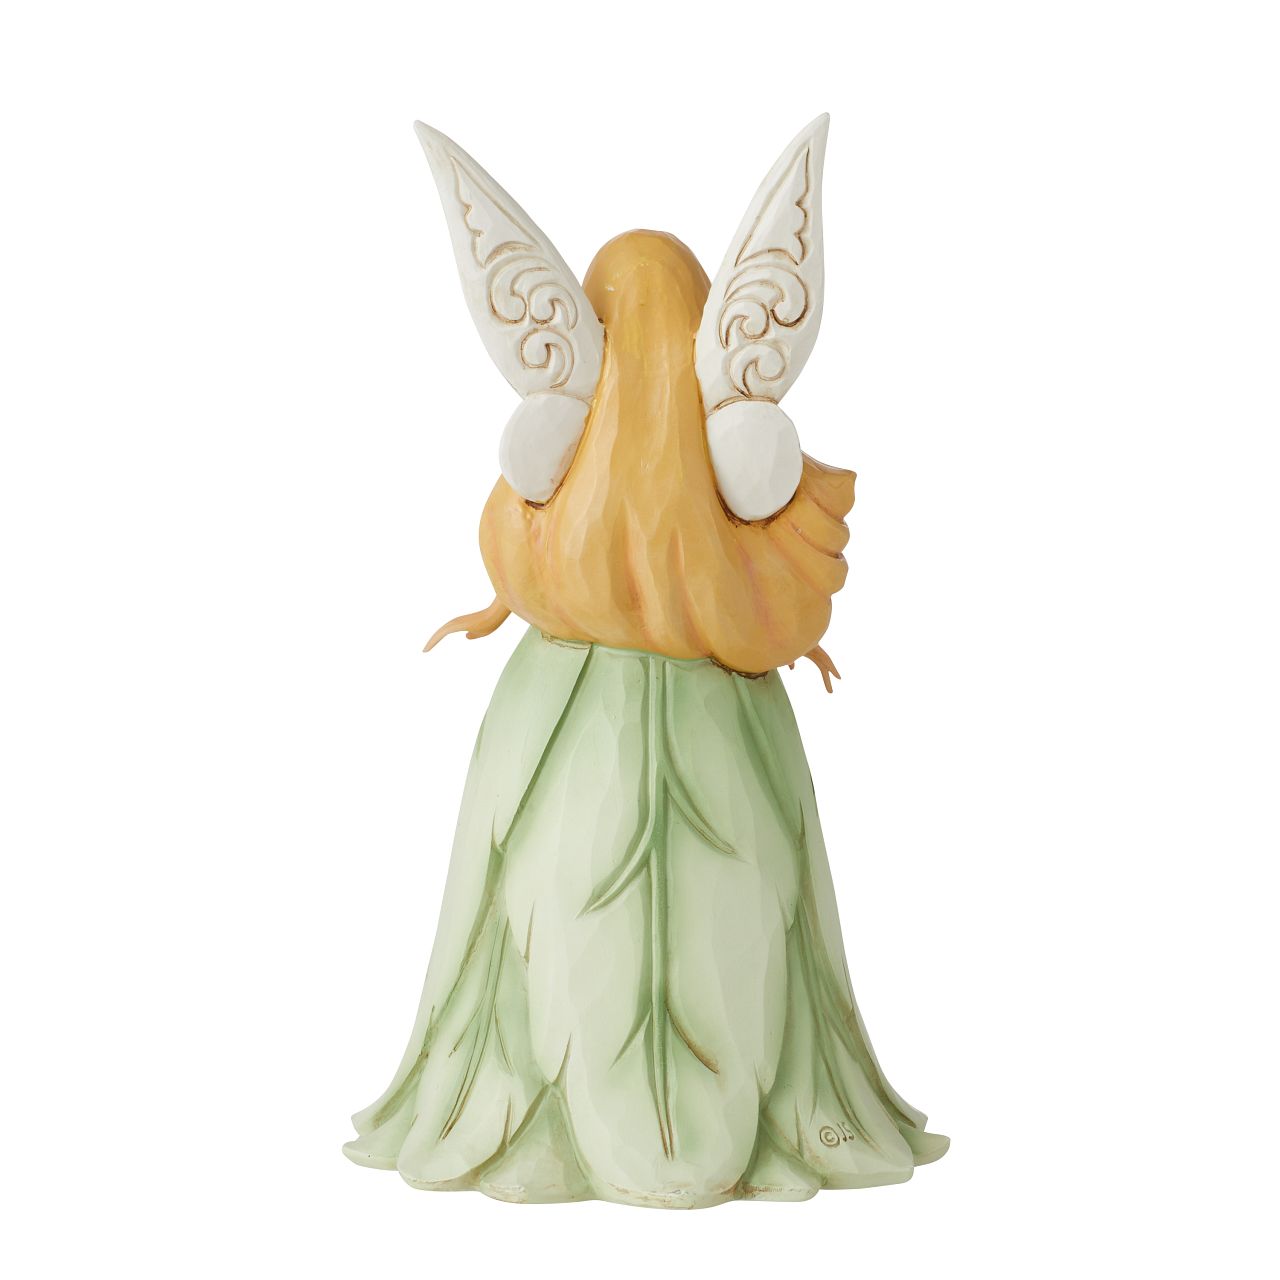 Jim Shore White Woodland Fairy with Leaf Skirt Figurine  Always believe and if not then at the very least enjoy the whimsical beauty of fairy's. This new collection of whimsical woodland fairies brings some magic to the White Woodland Collection and is sure to be a collectors favourite.